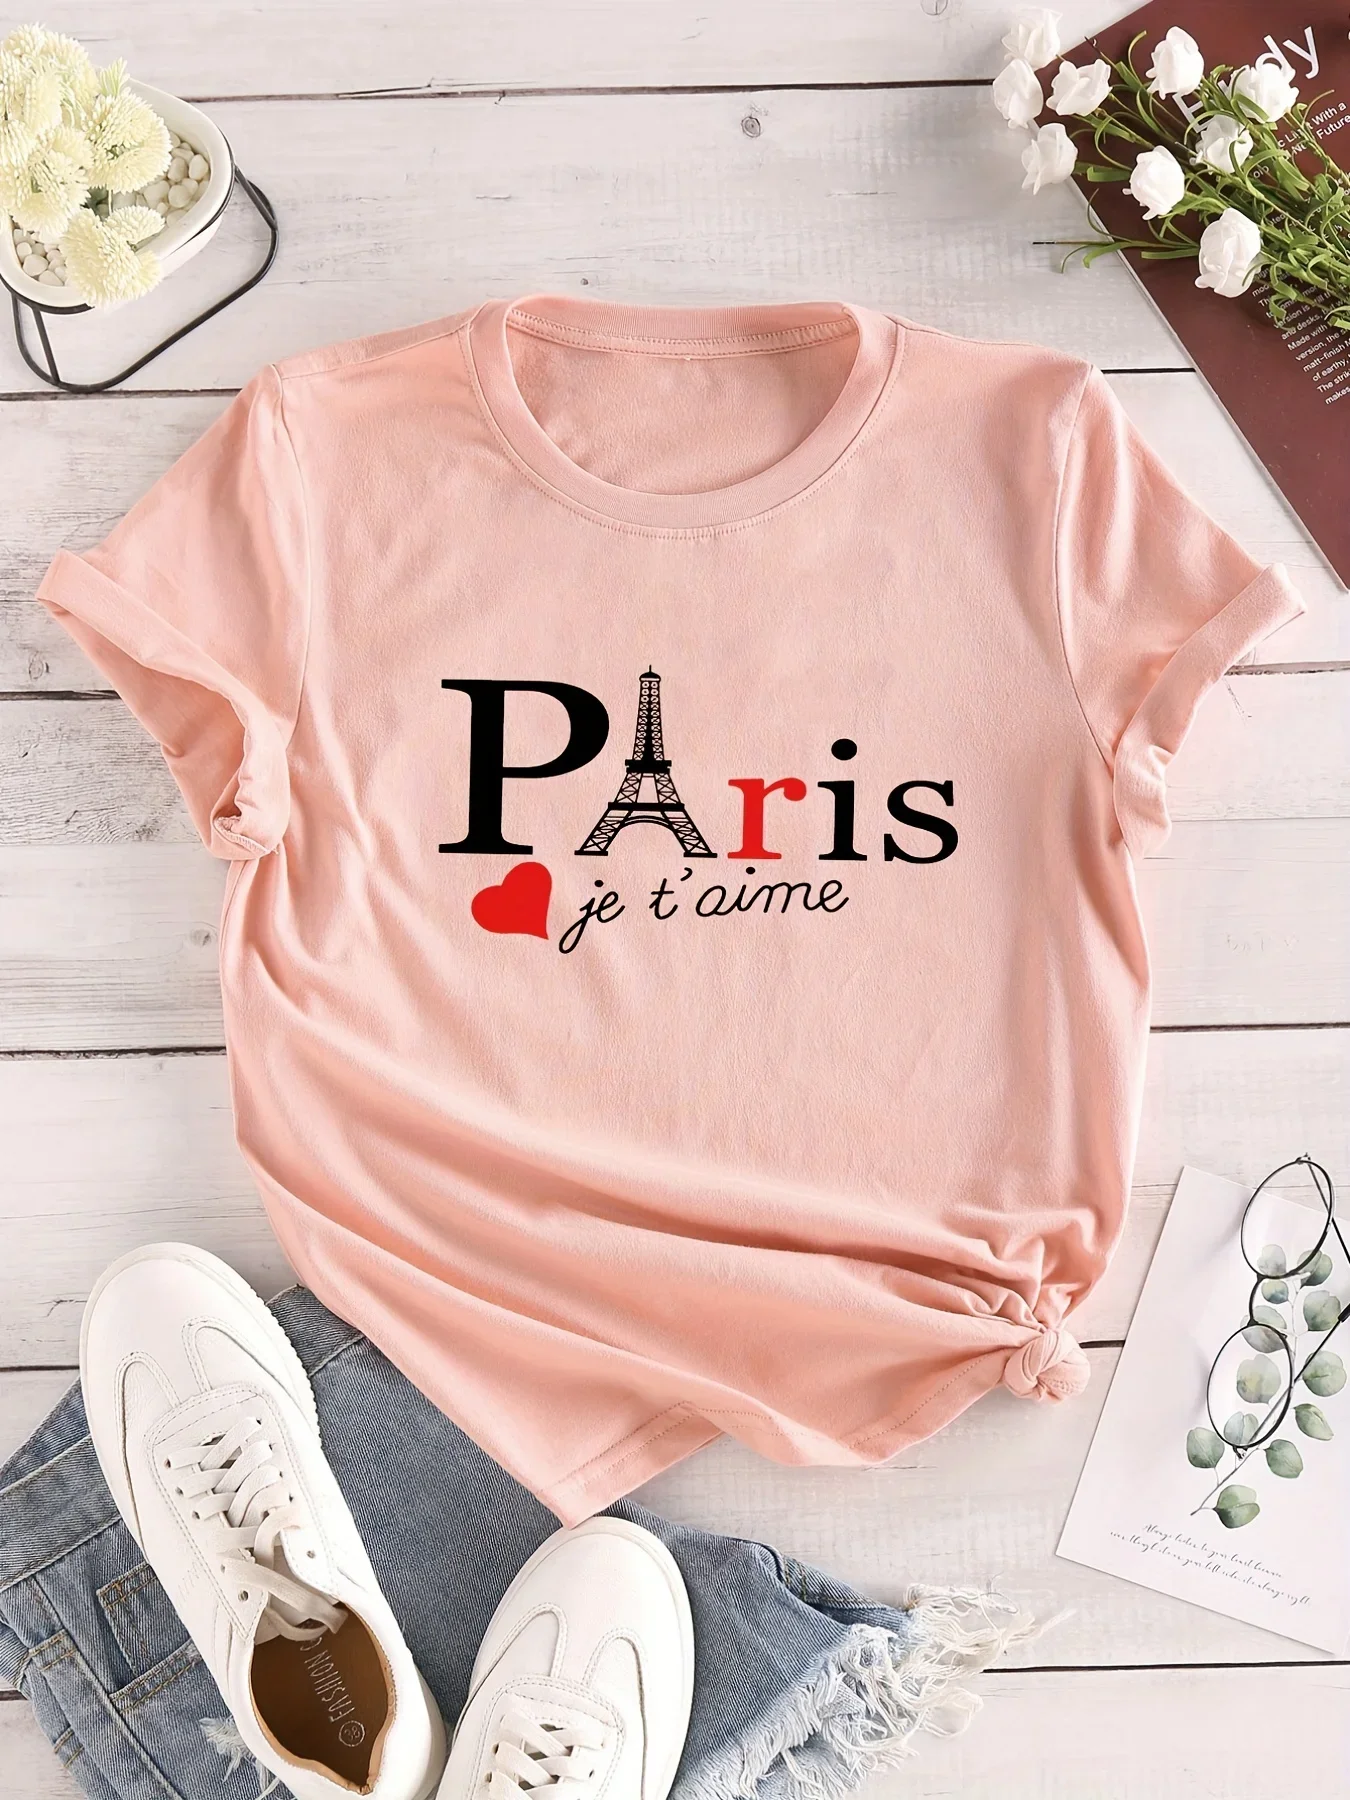 

Casual Short Sleeve T Shirt Paris Letter Print Crew Neck Women T-Shirts Casual Every Day Top Women's Clothing Female Tops Tees